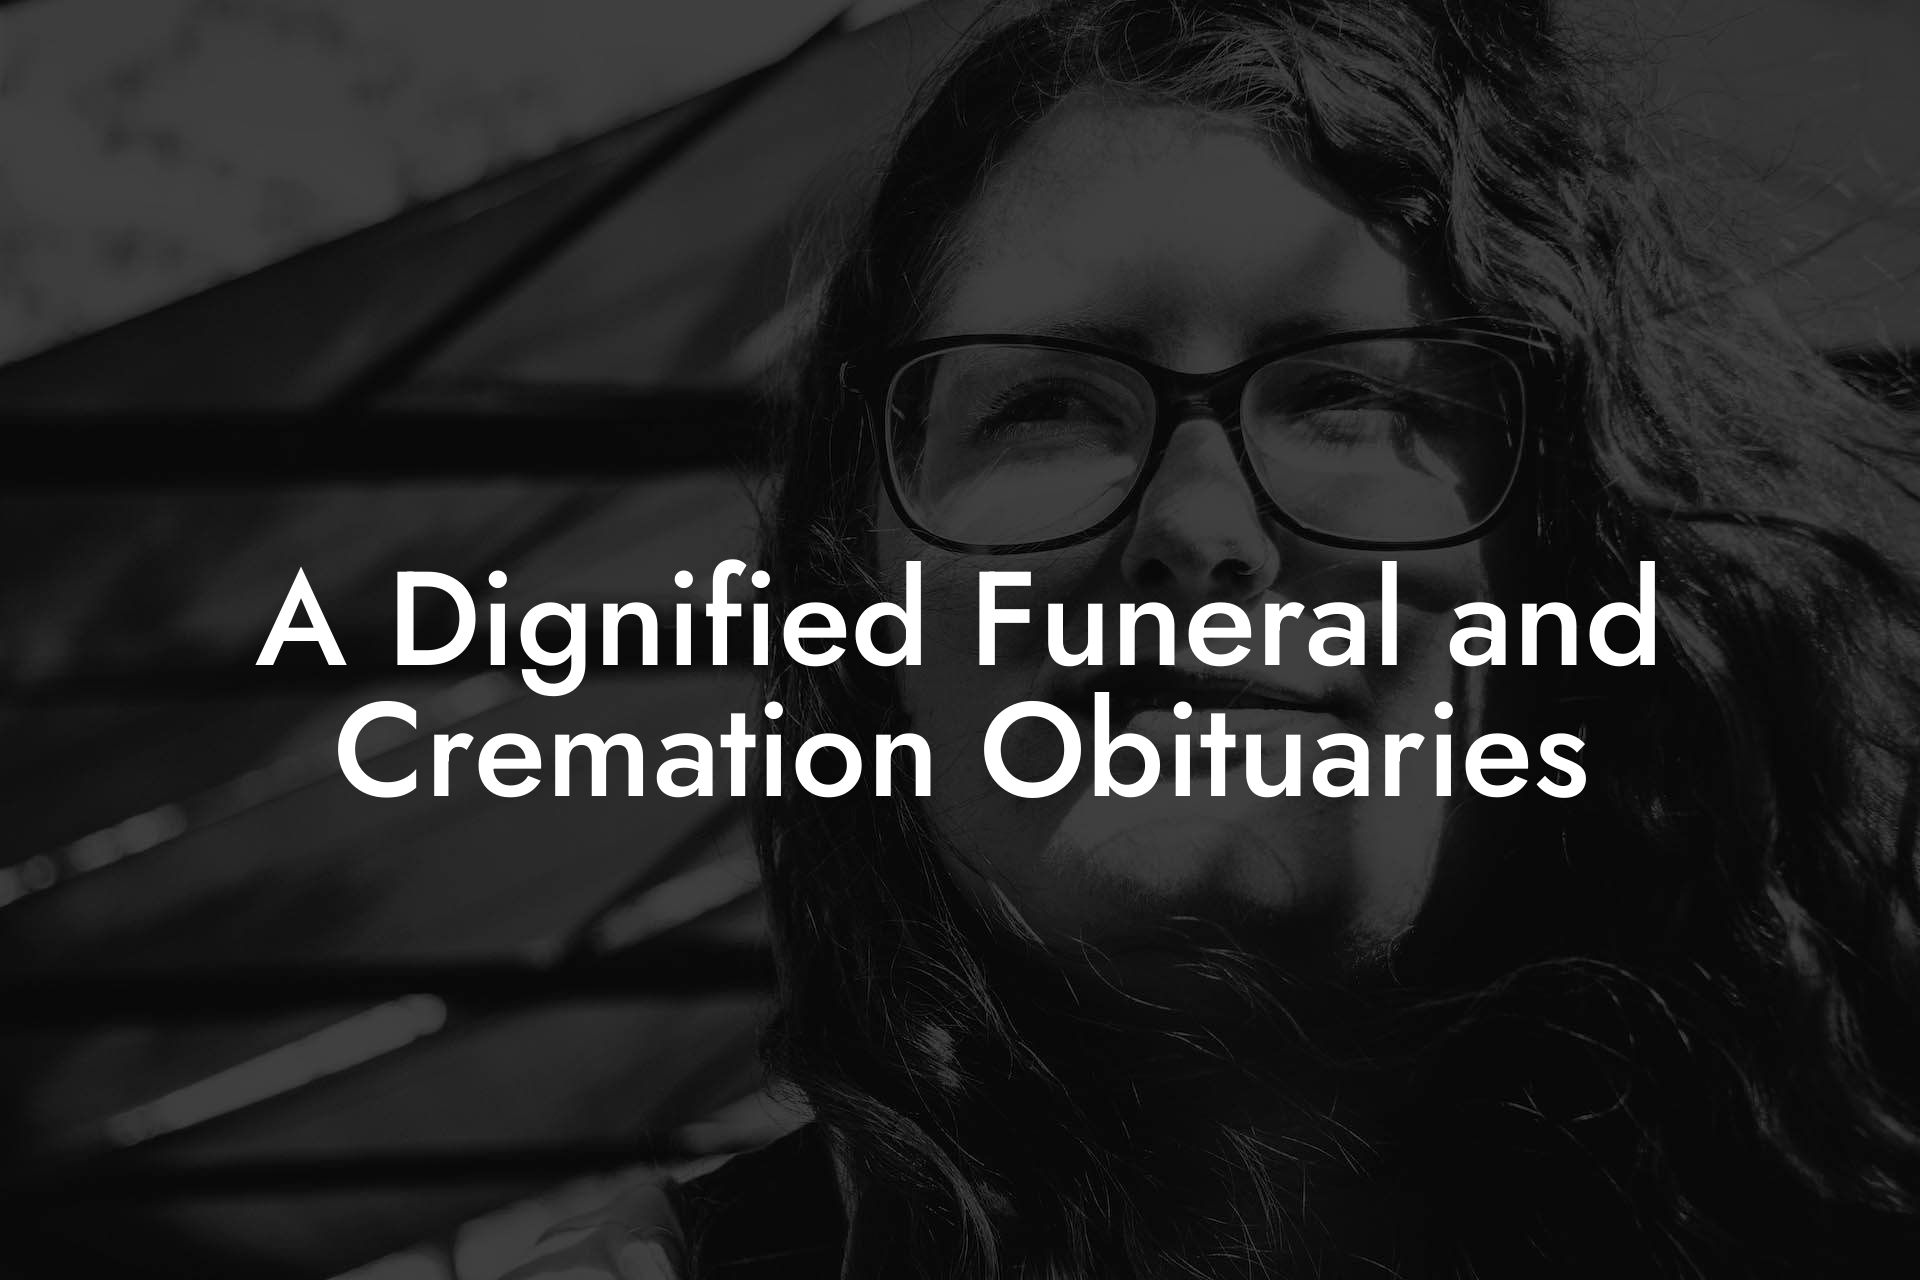 A Dignified Funeral and Cremation Obituaries